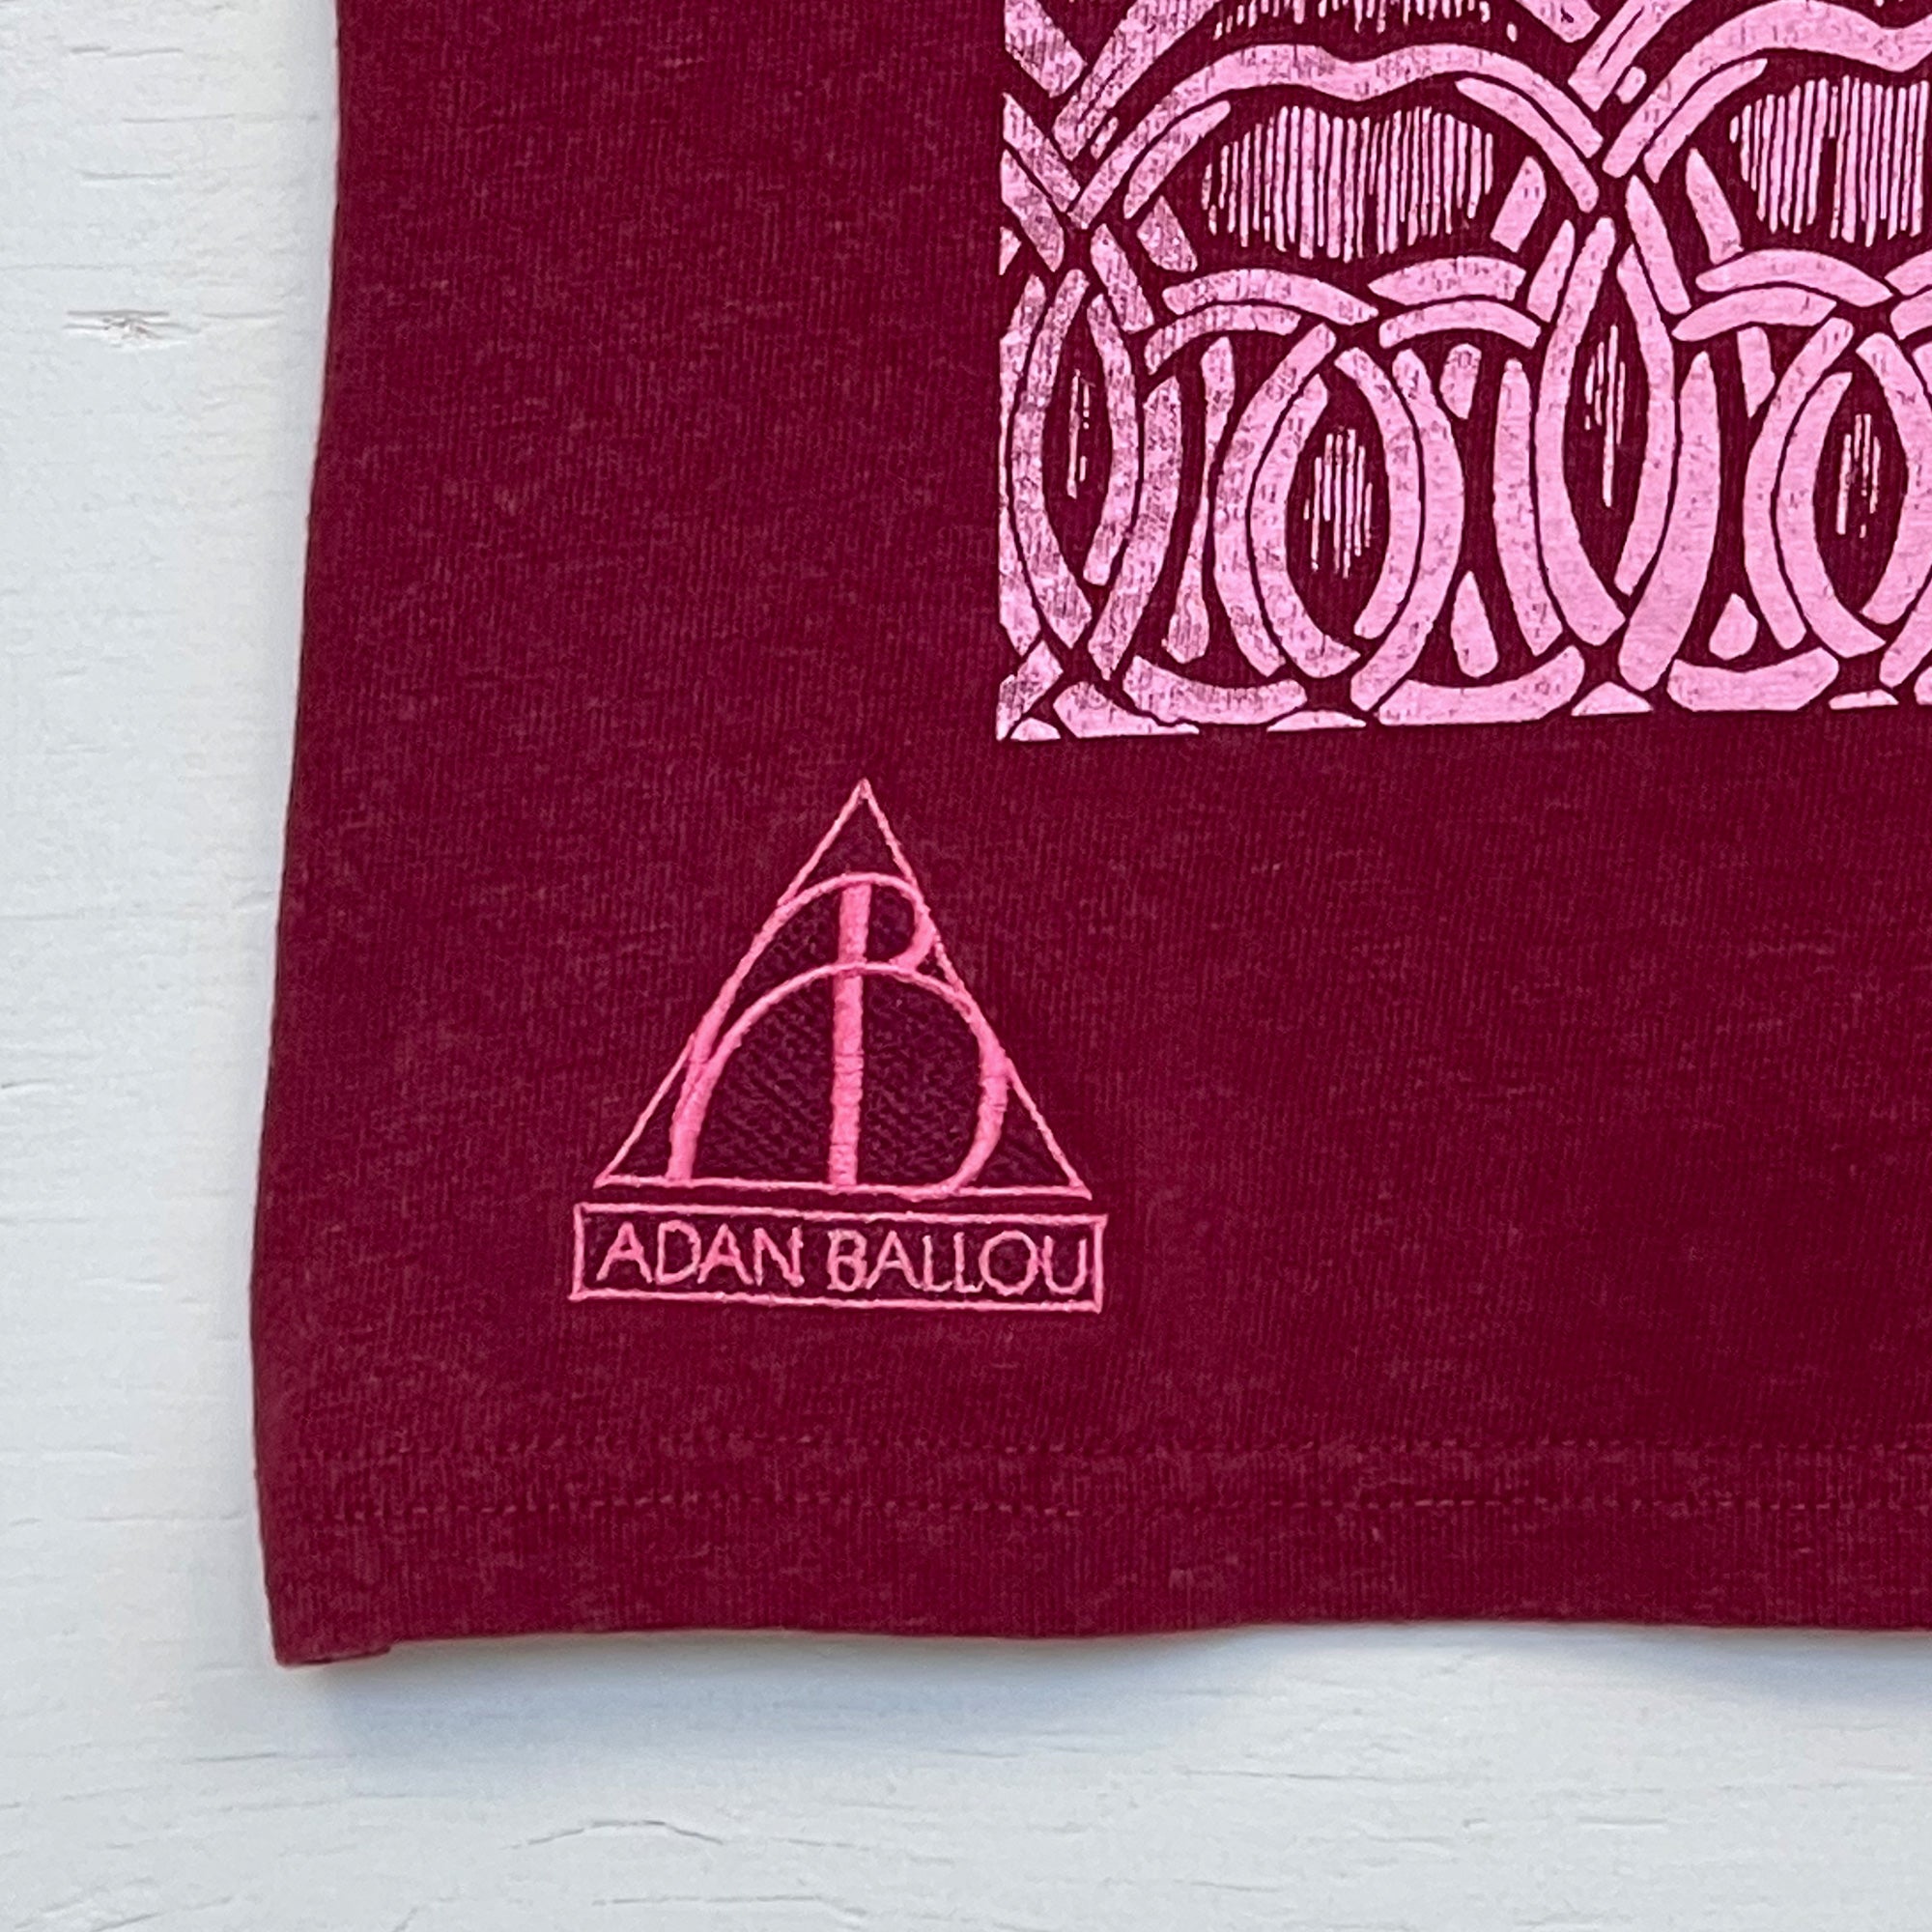 We Are All Pink Inside Burgundy Tee